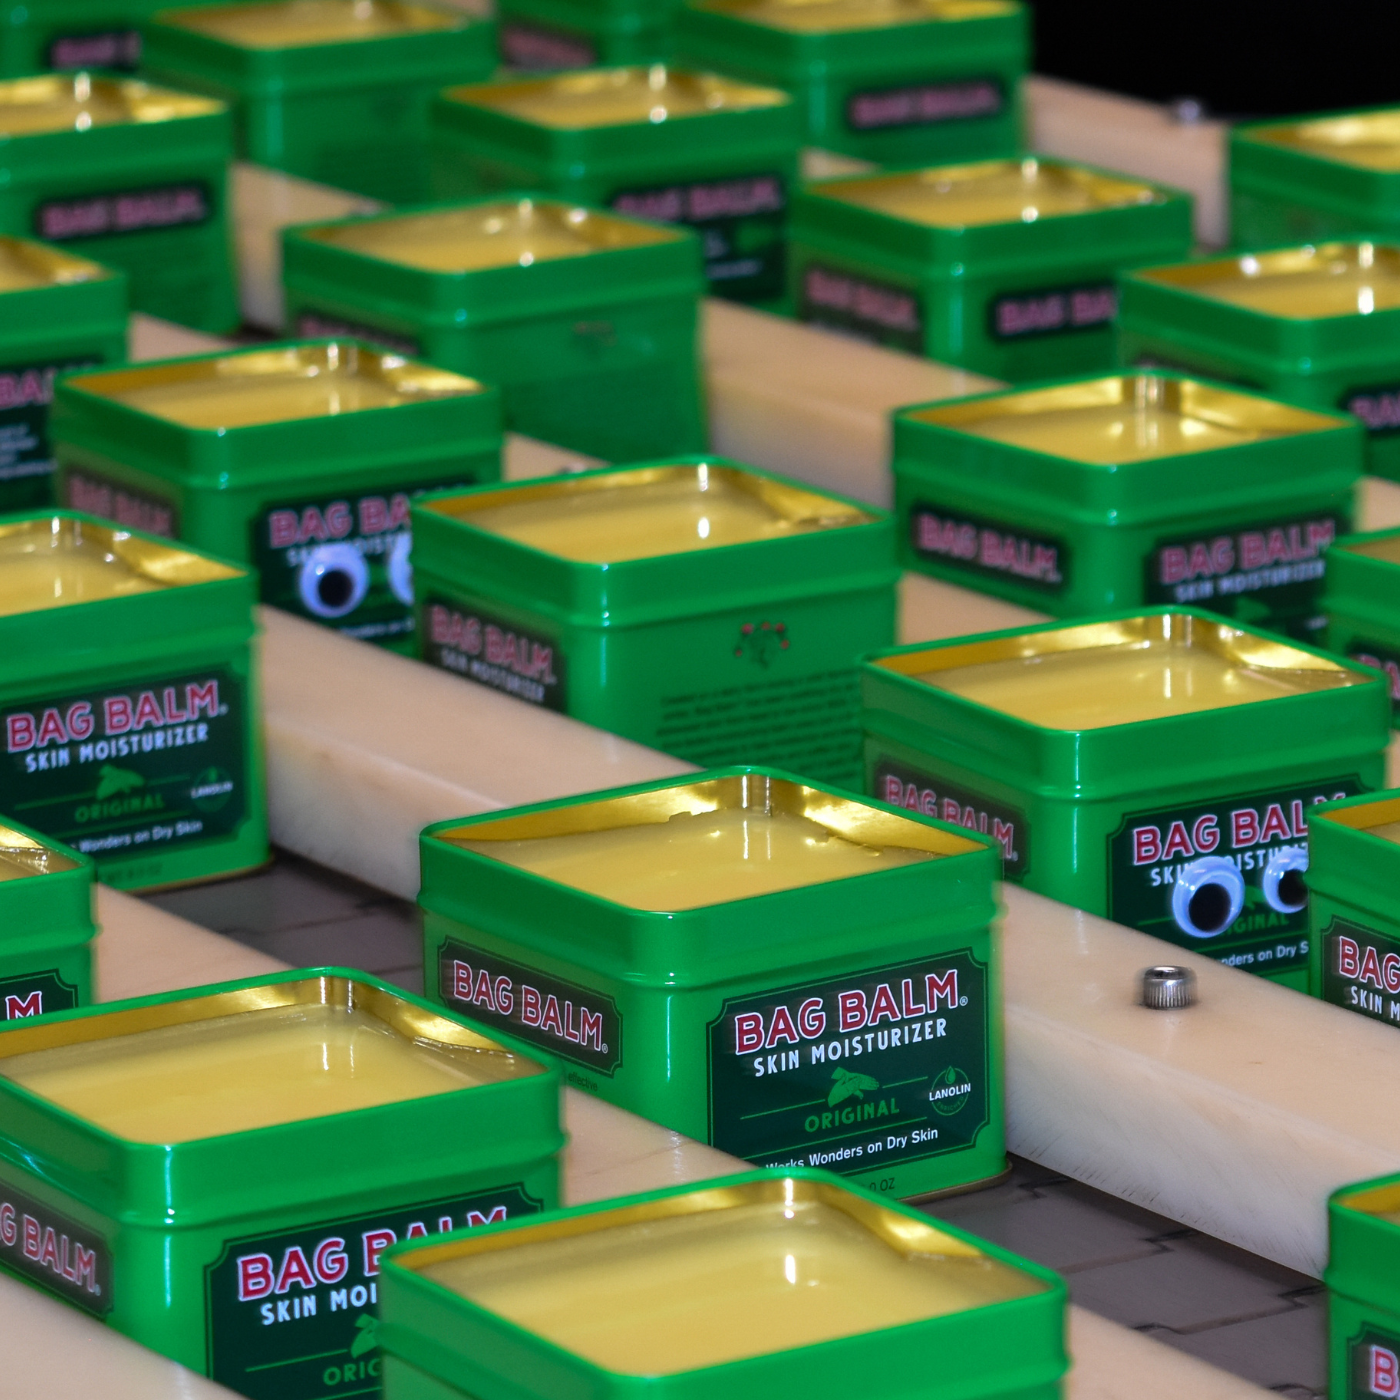 Image of many open green tins of Bag Balm in a factory